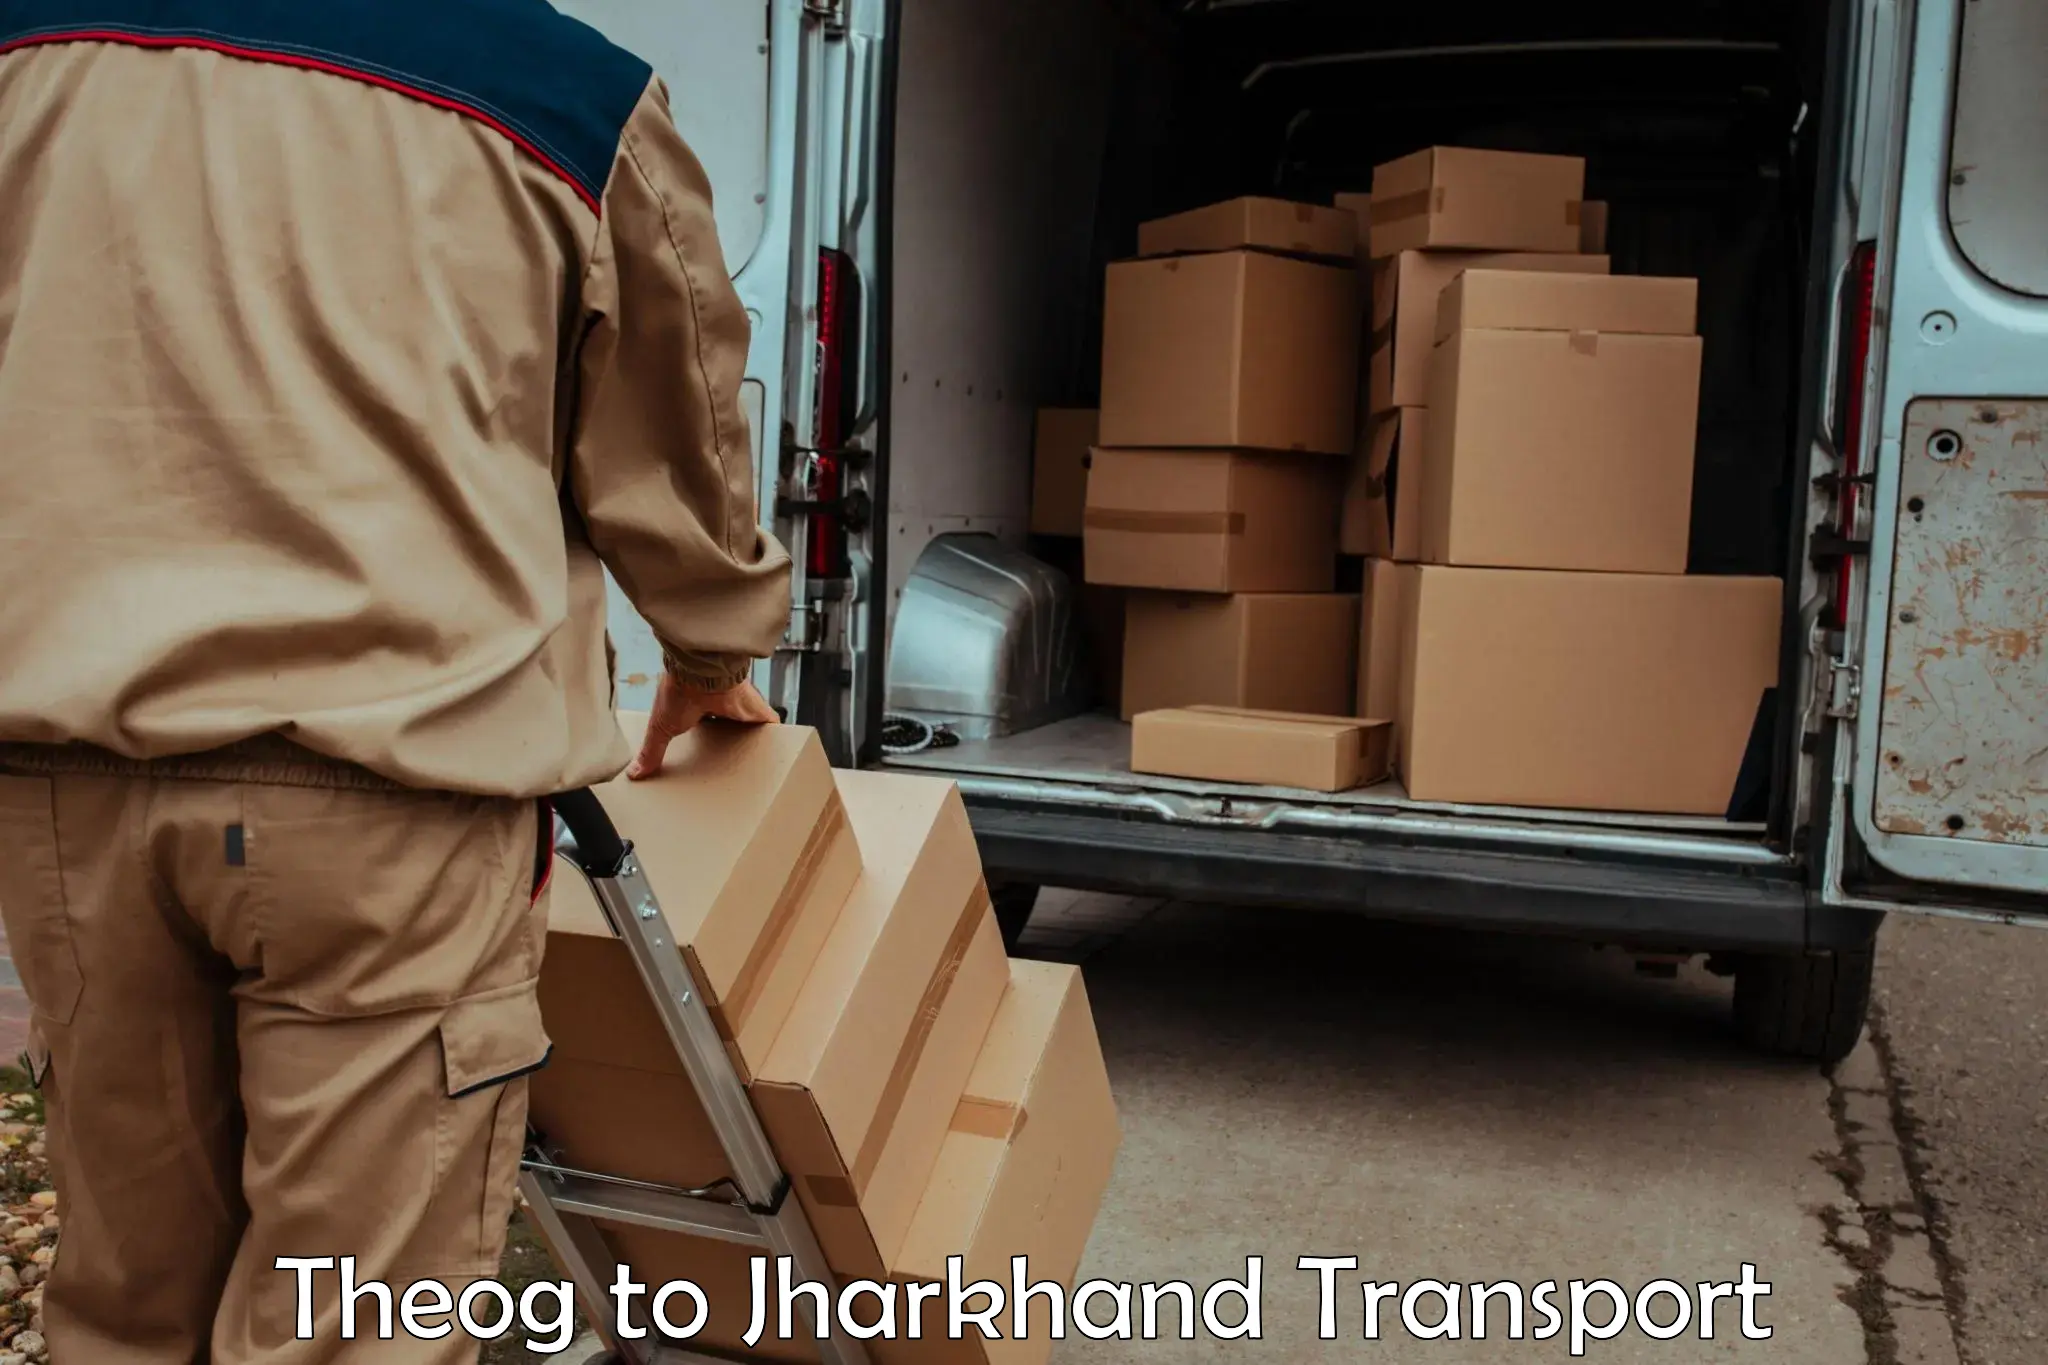 Lorry transport service Theog to Jharkhand